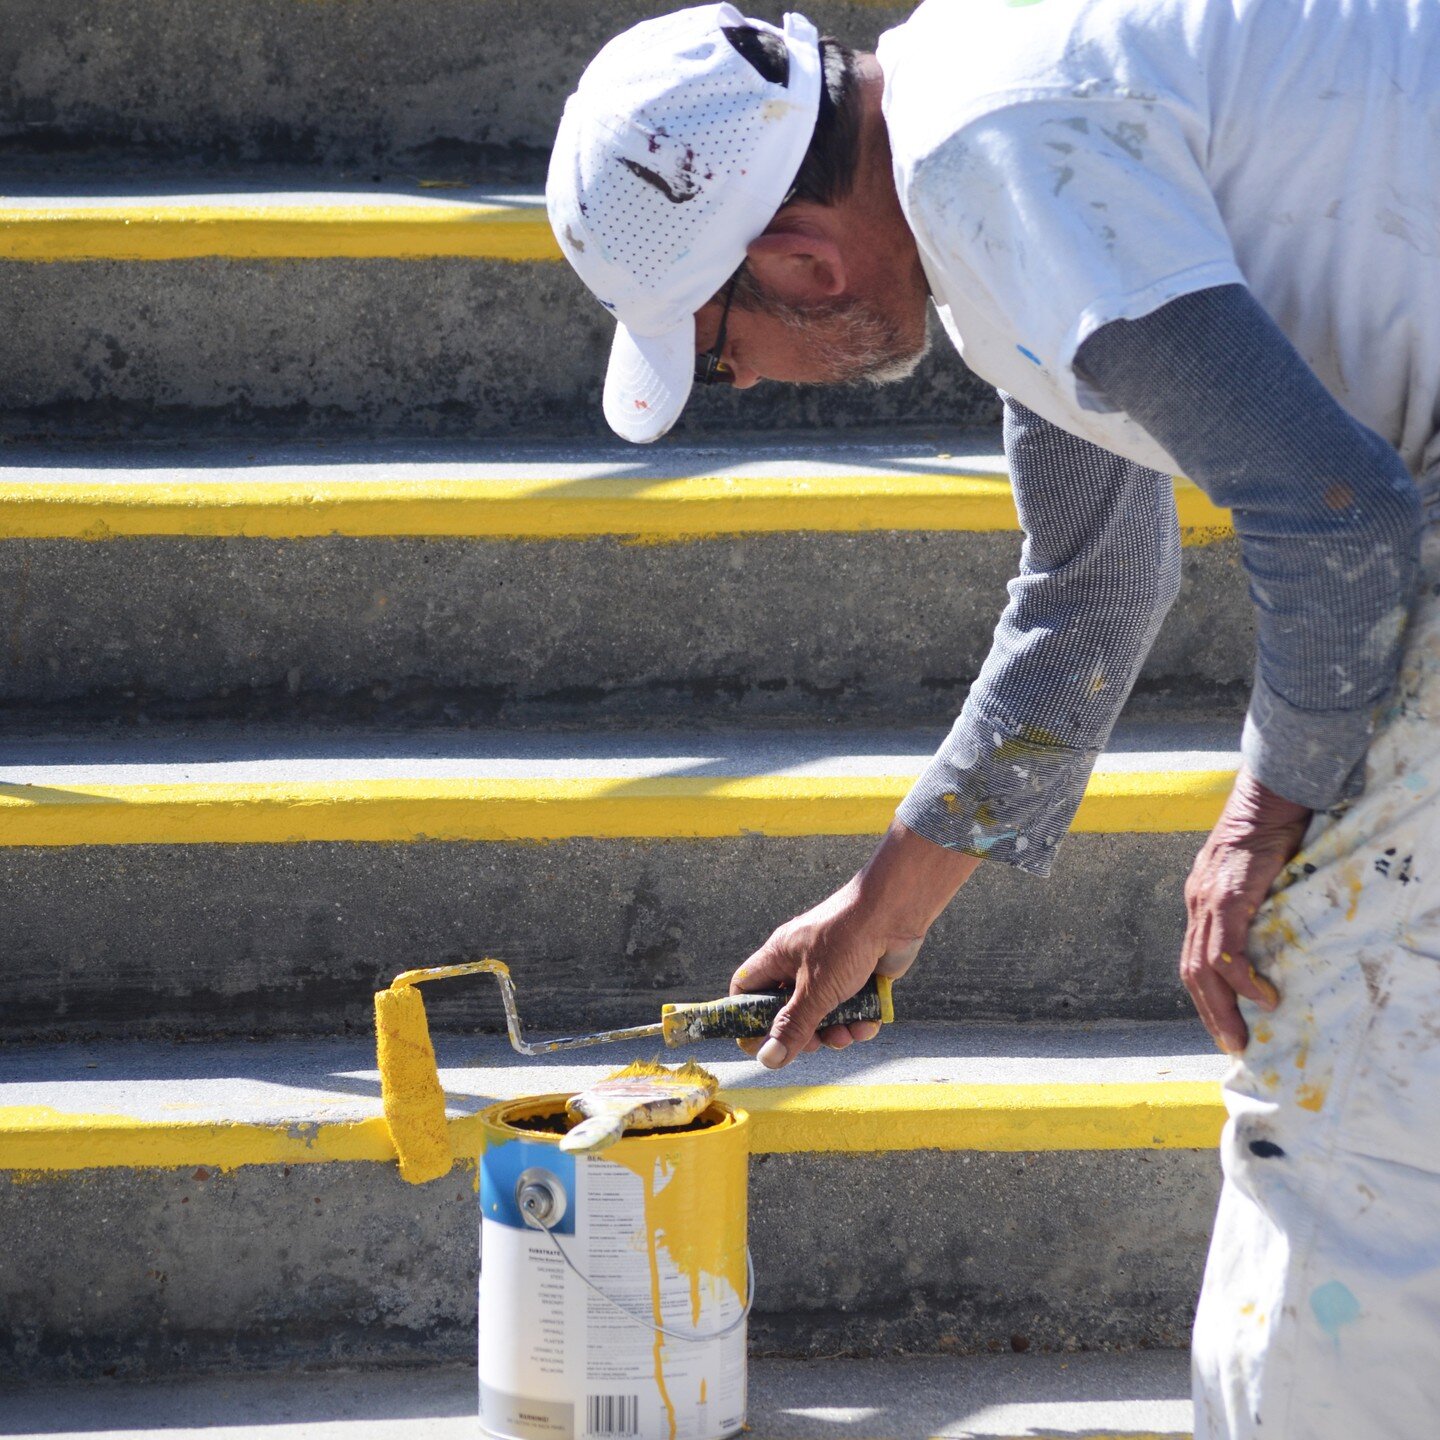 Looking to refresh your business's exterior before the holidays? Connect with us today to get on the schedule! 🏢
&bull;
&bull;
&bull;
#commercialpainter #commercialpainting #shinetime #shinetimeinc #curbappeal #businessowner